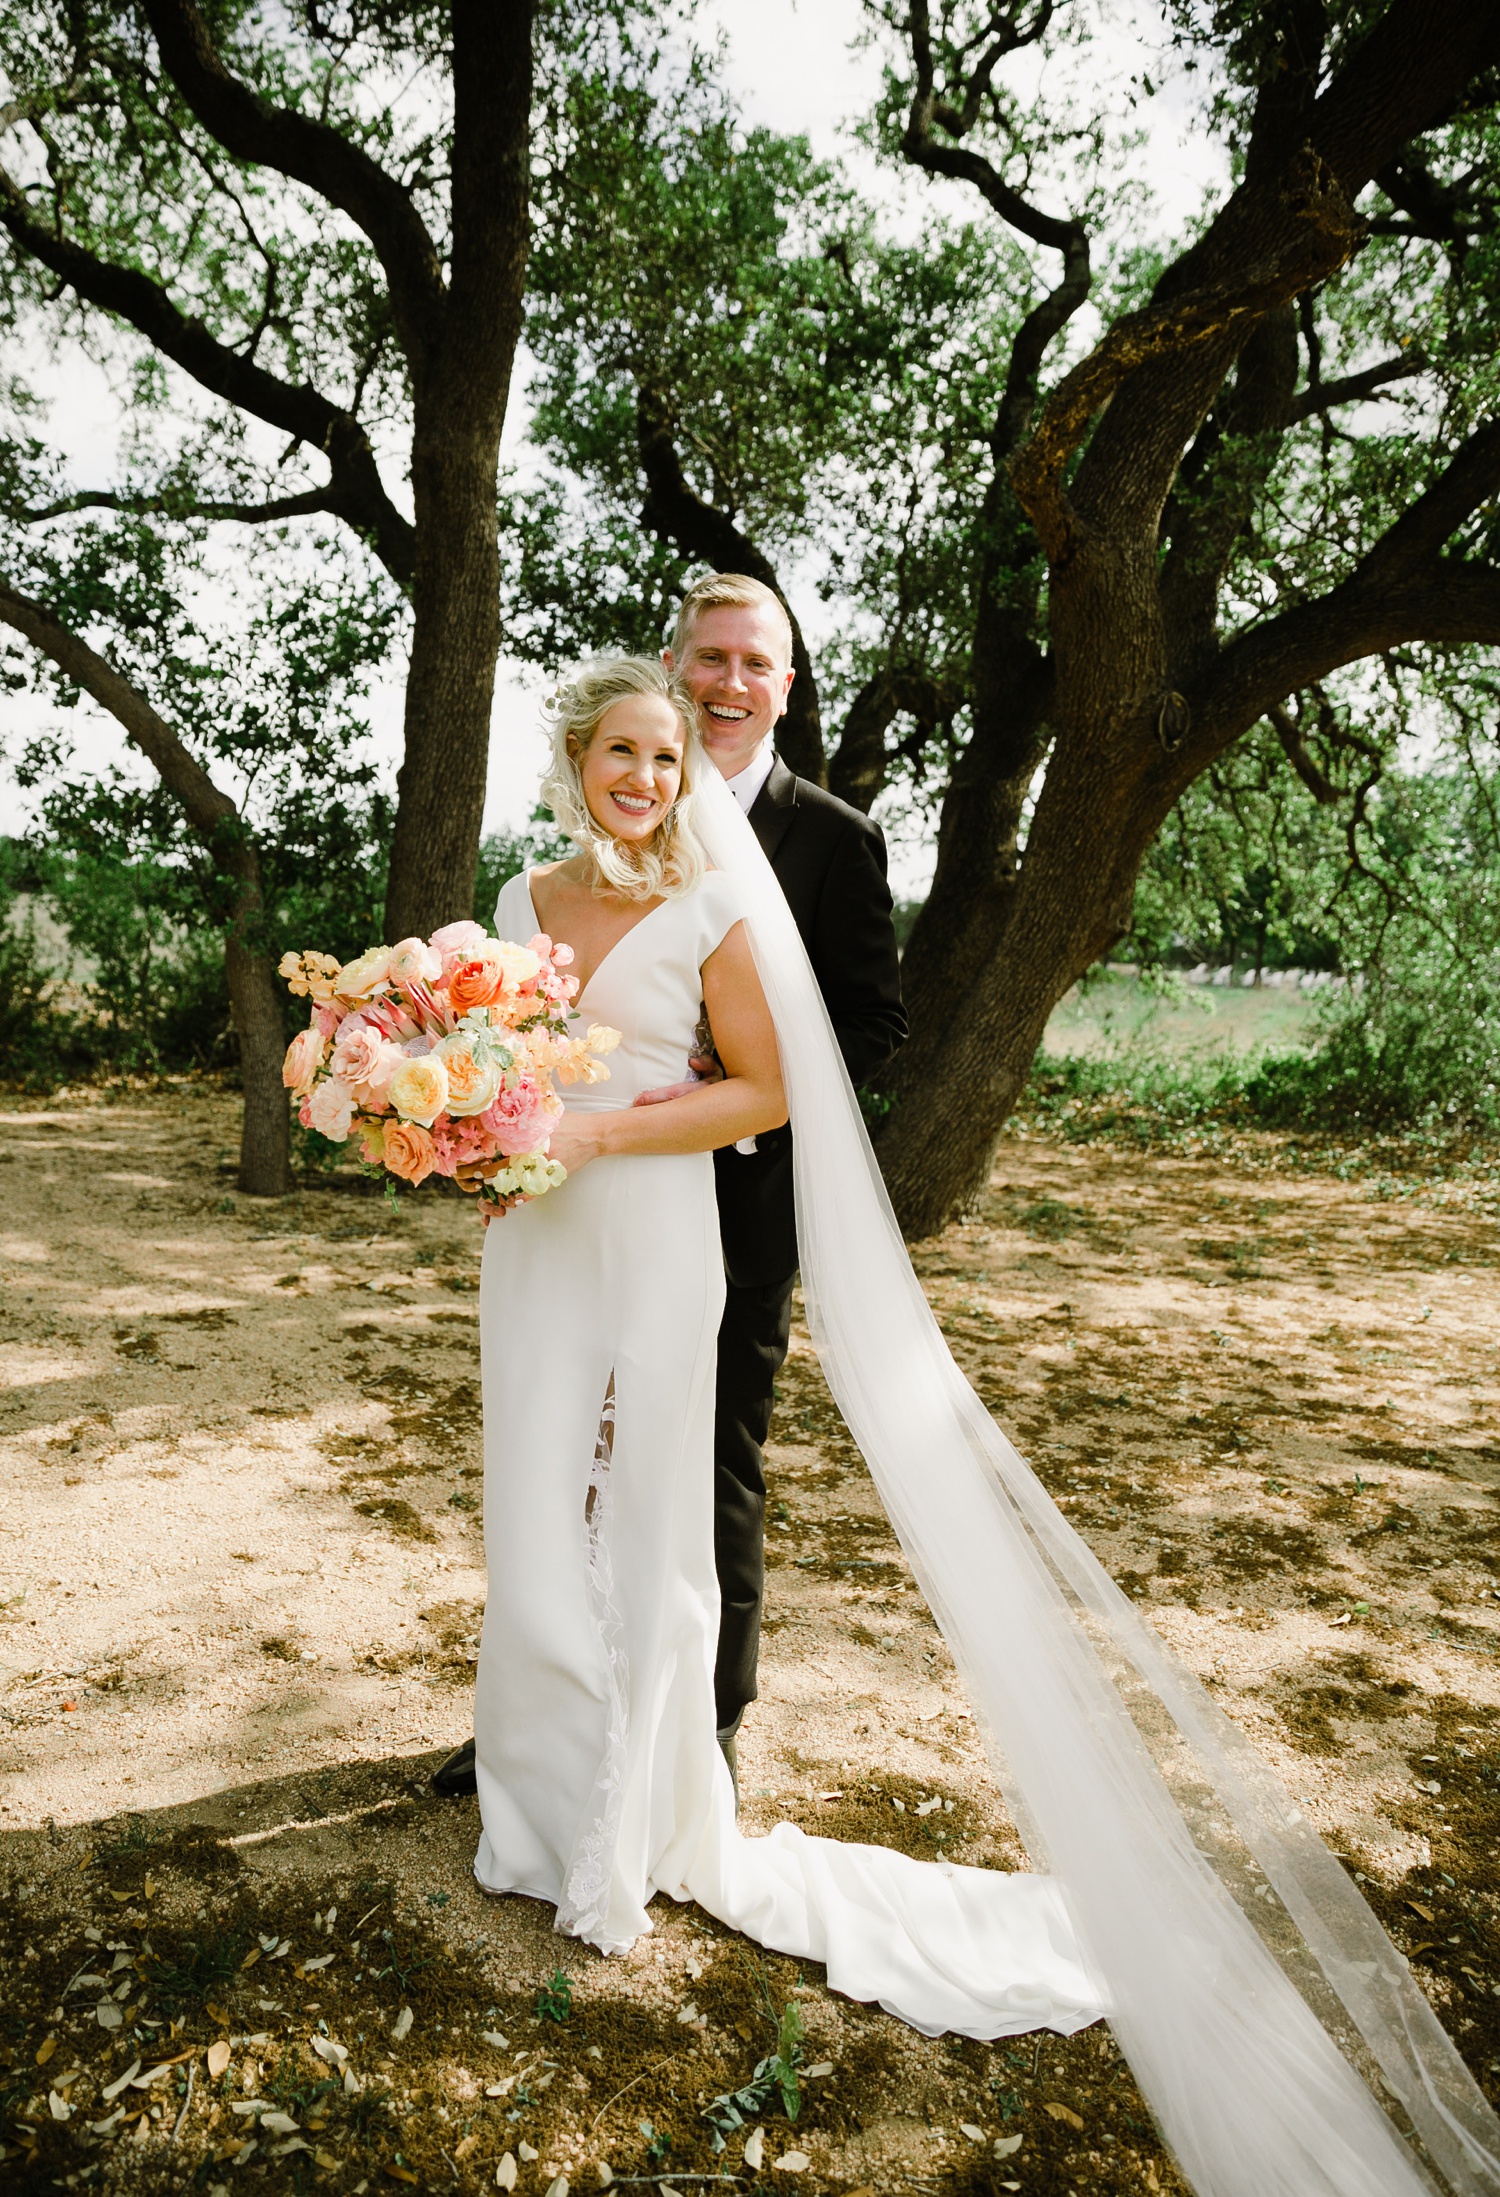 Amber Vickery - Austin, TX Intimate Wedding and Elopement Photographer